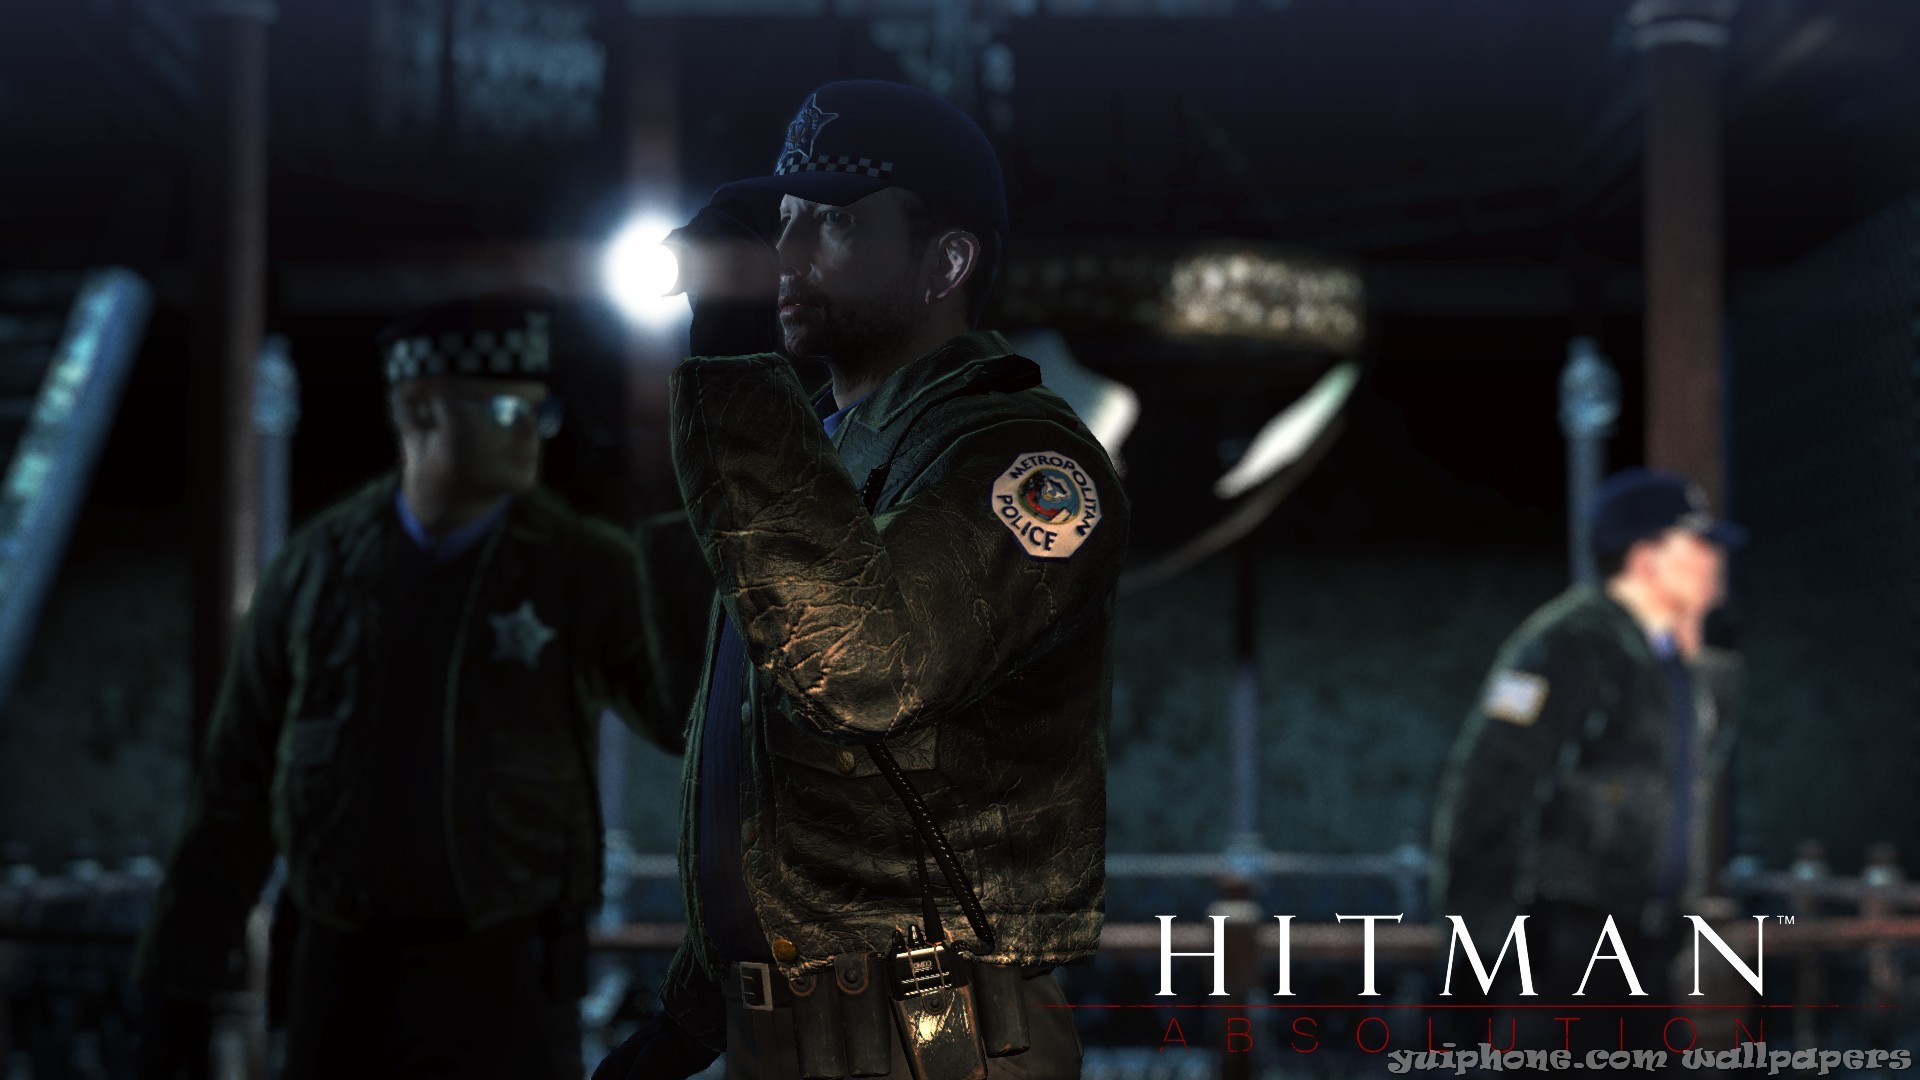 Metro Police Hitman Absolution Wallpapers 1080p Hd - Hitman Absolution - HD Wallpaper 